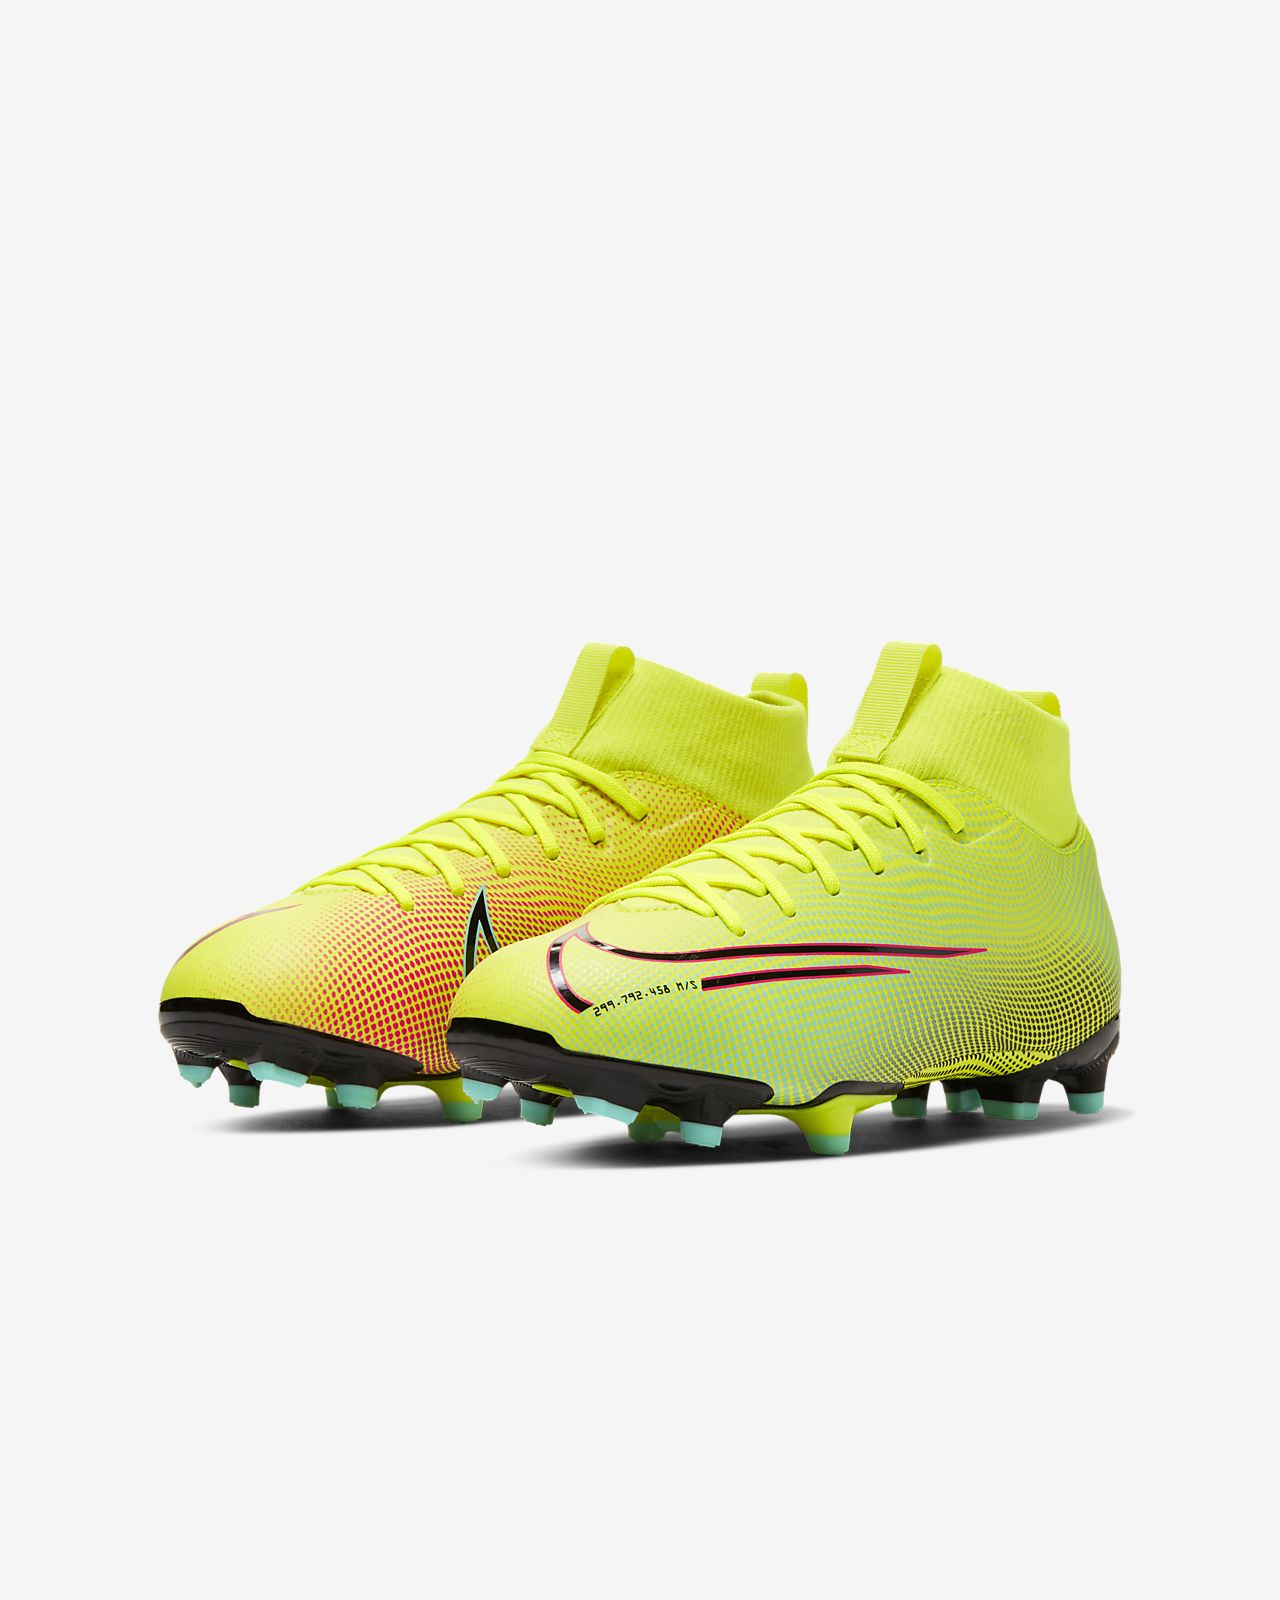 Nike Mercurial Superfly 6 Academy MG Review Soccer.